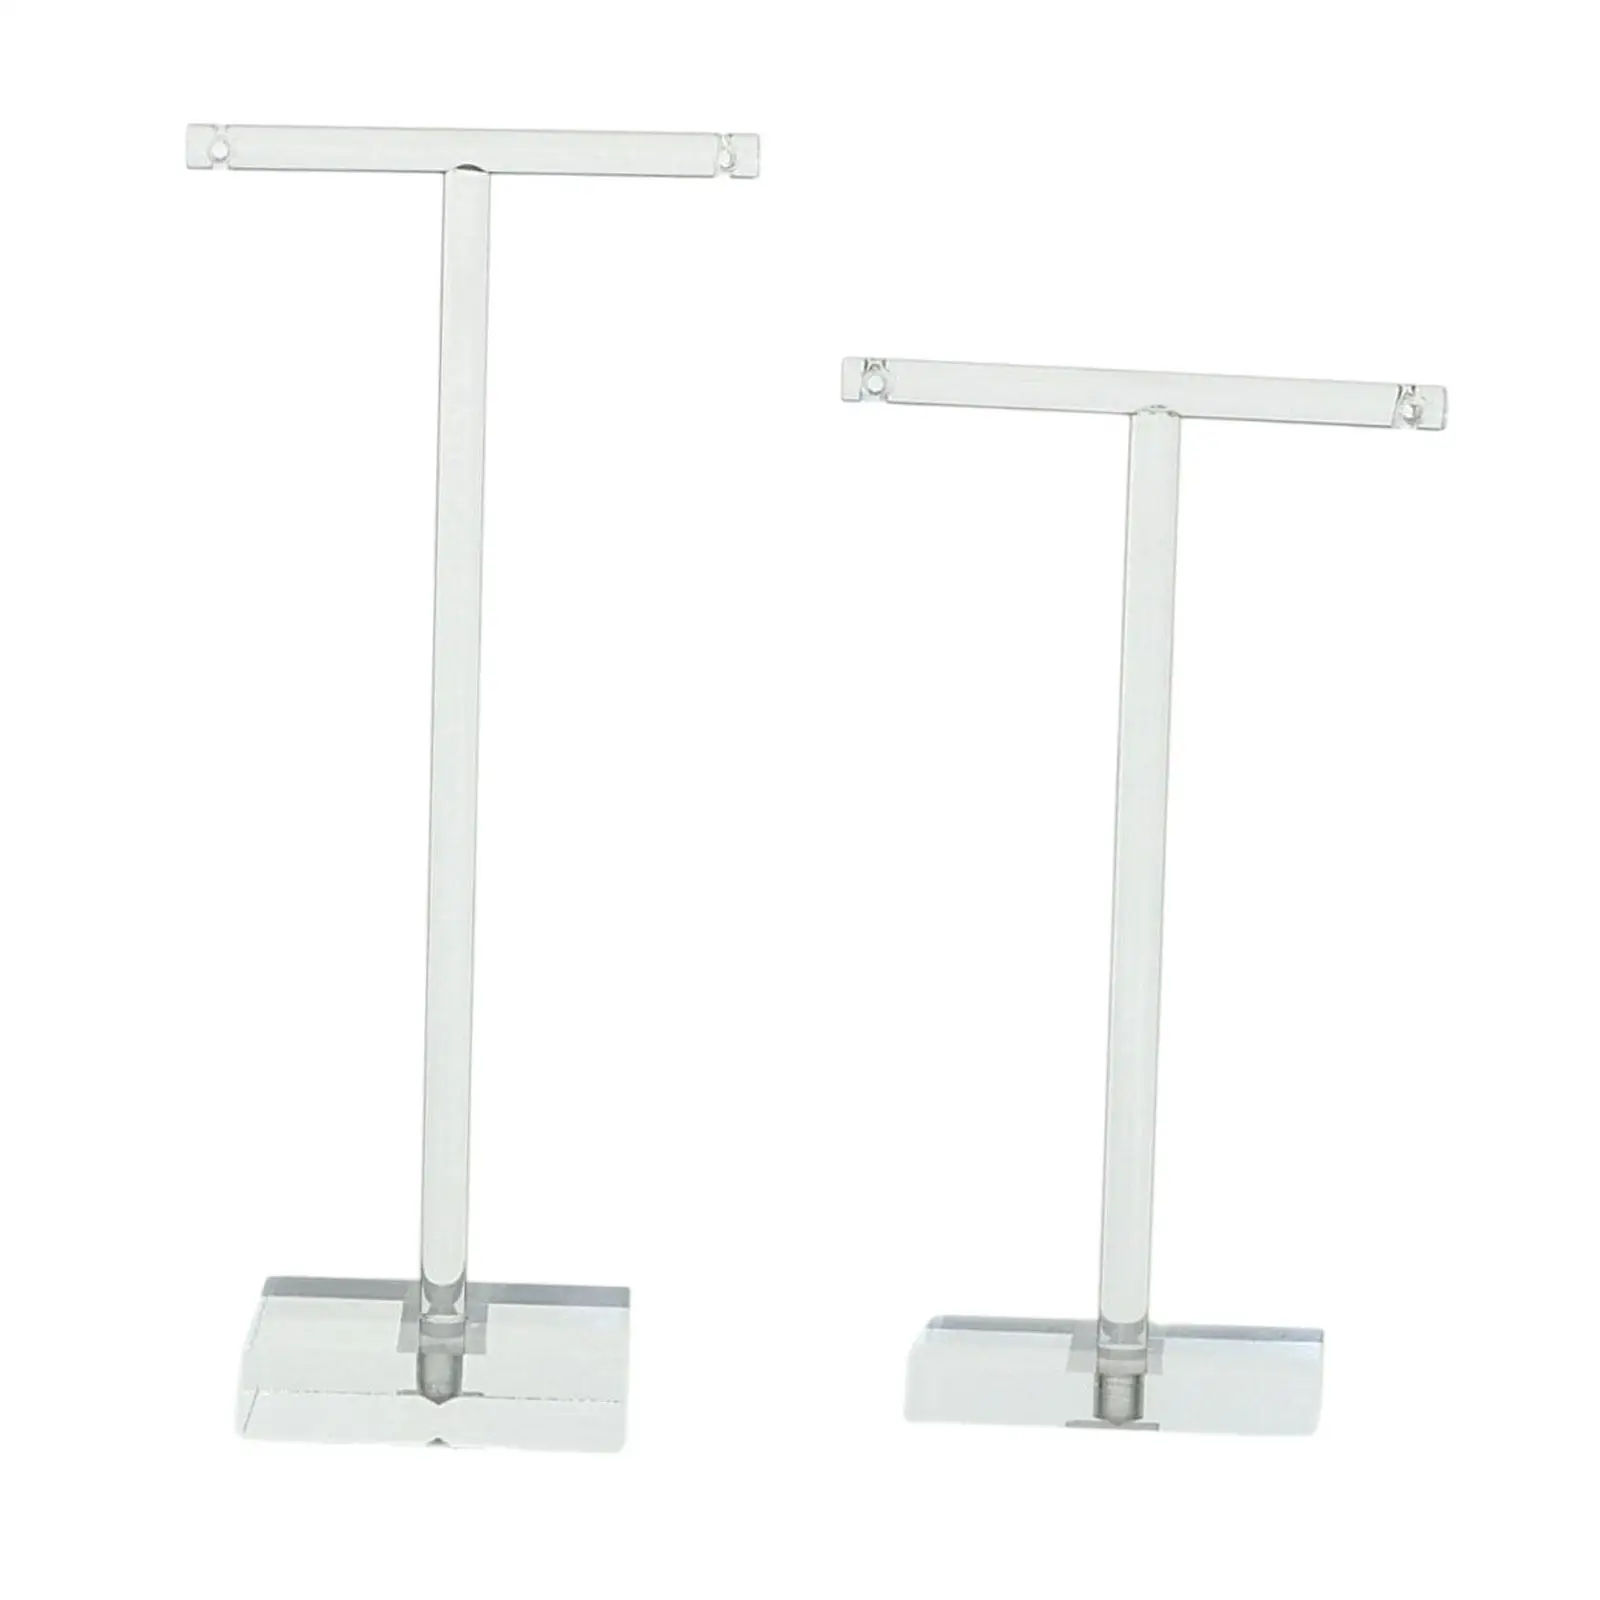 2x Earring Display Stand T Bar with Base Earring Holder Earring Stand Jewelry Organizer for Desktop Home Vanity Dresser Store